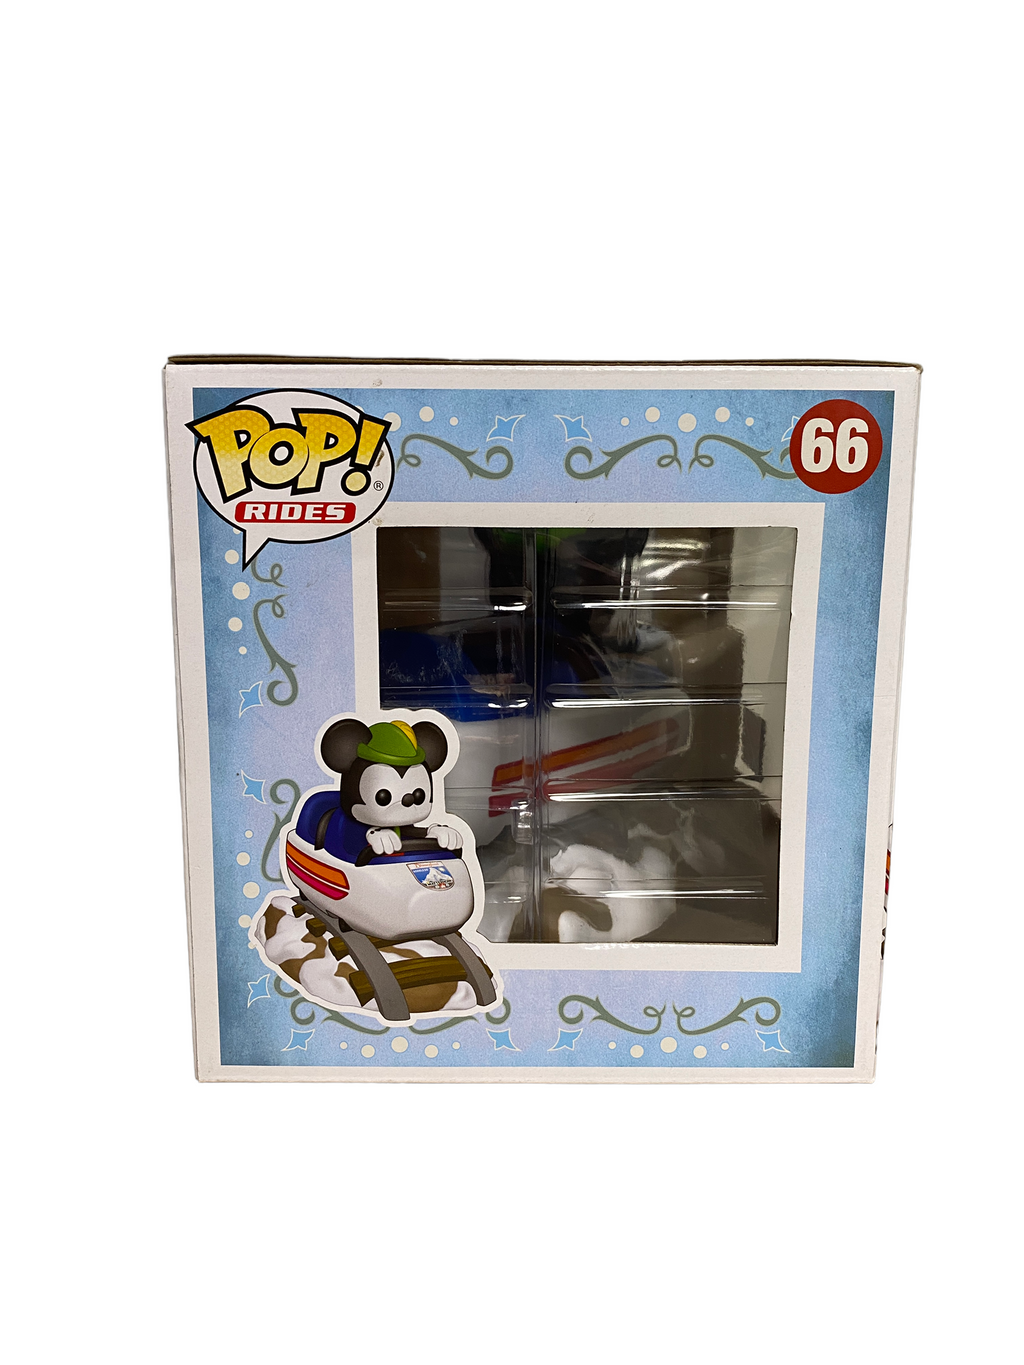 Matterhorn Bobsled And Mickey Mouse #66 Funko Pop Ride! - Disney - NYCC  2019 Exclusive LE1500 Pcs - Condition 8.5/10